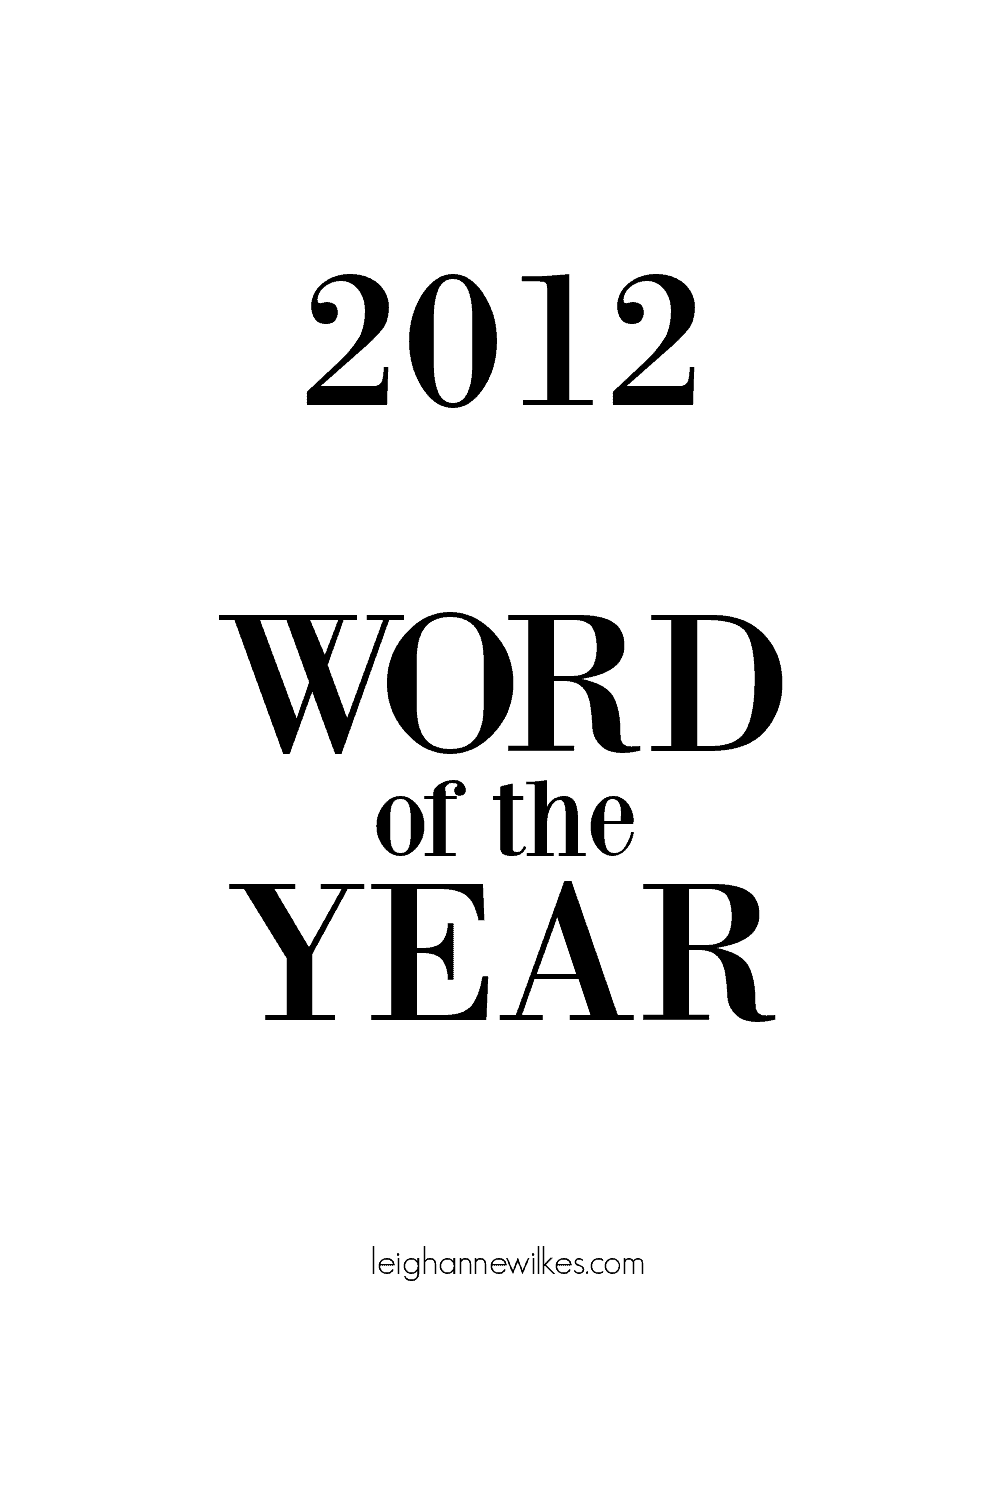 2012 word of the year